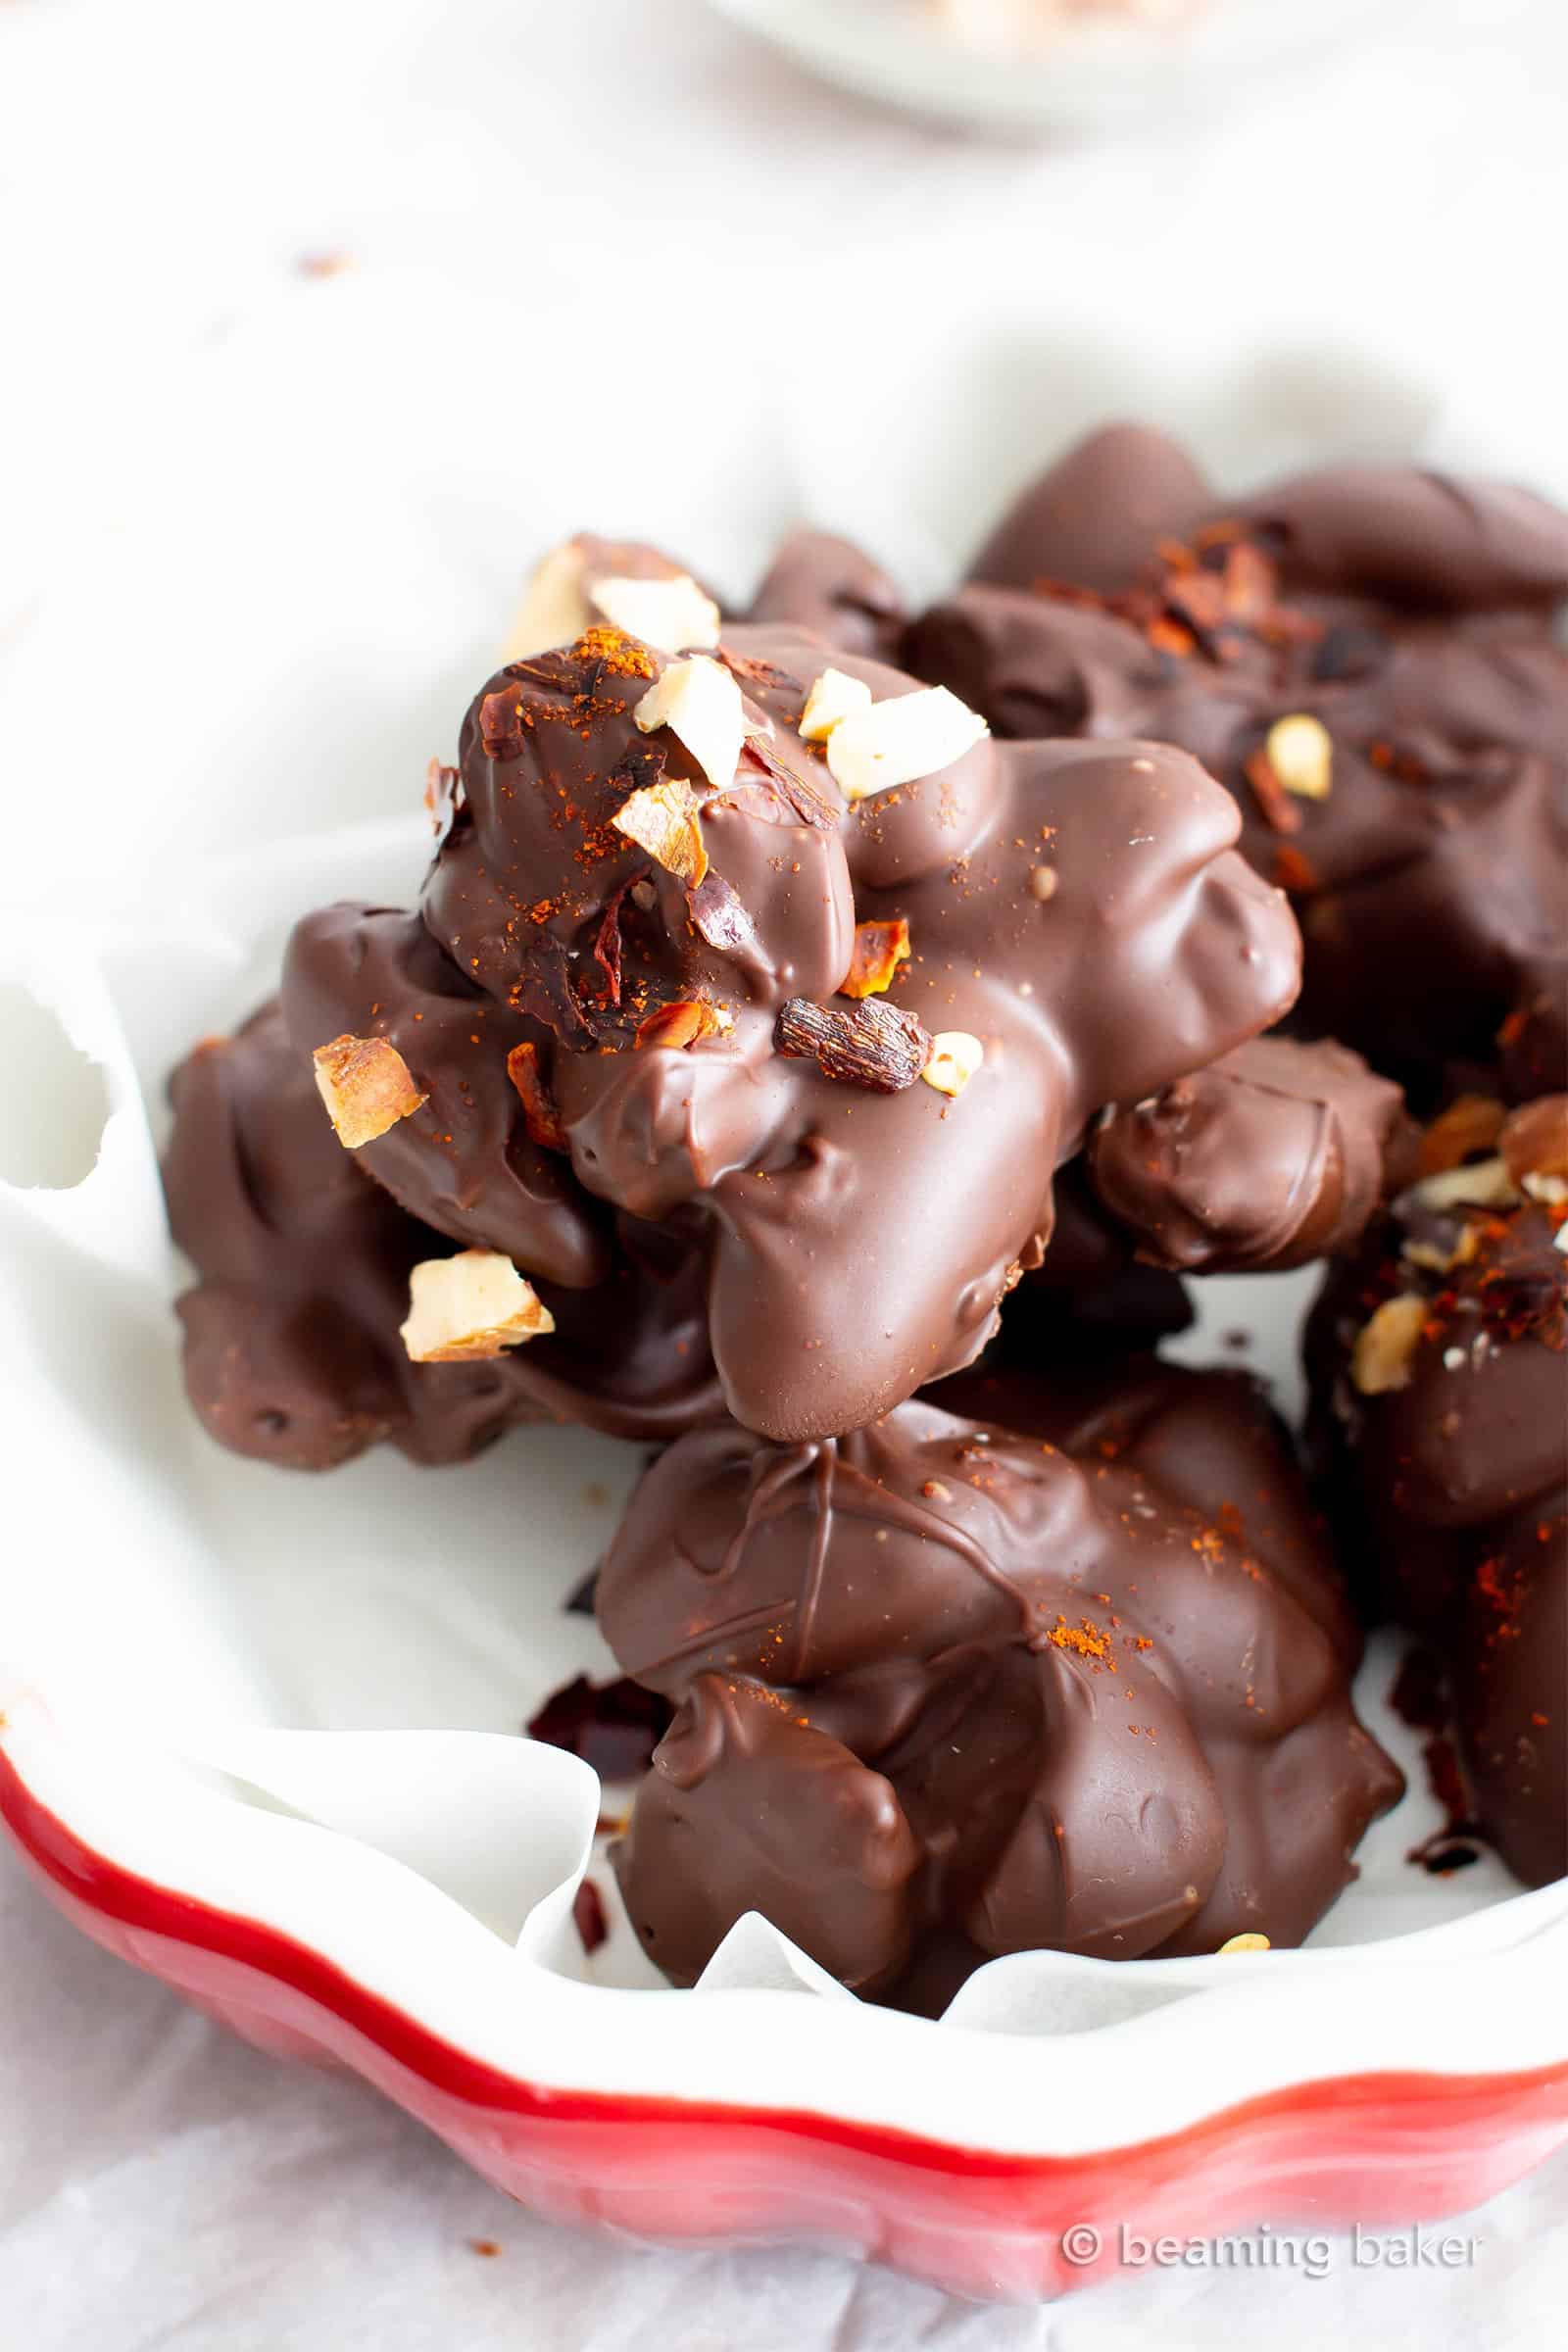 Dark Chocolate Chili Nut Clusters Recipe (V, GF): this homemade chocolate nut clusters recipe is healthy, easy and decadent! It’s the perfect dark chocolate treat – spicy, rich, packed with sweet nut clusters & prep’d in 15 minutes! #Chocolate #Vegan #Dessert #Nuts | Recipe at BeamingBaker.com